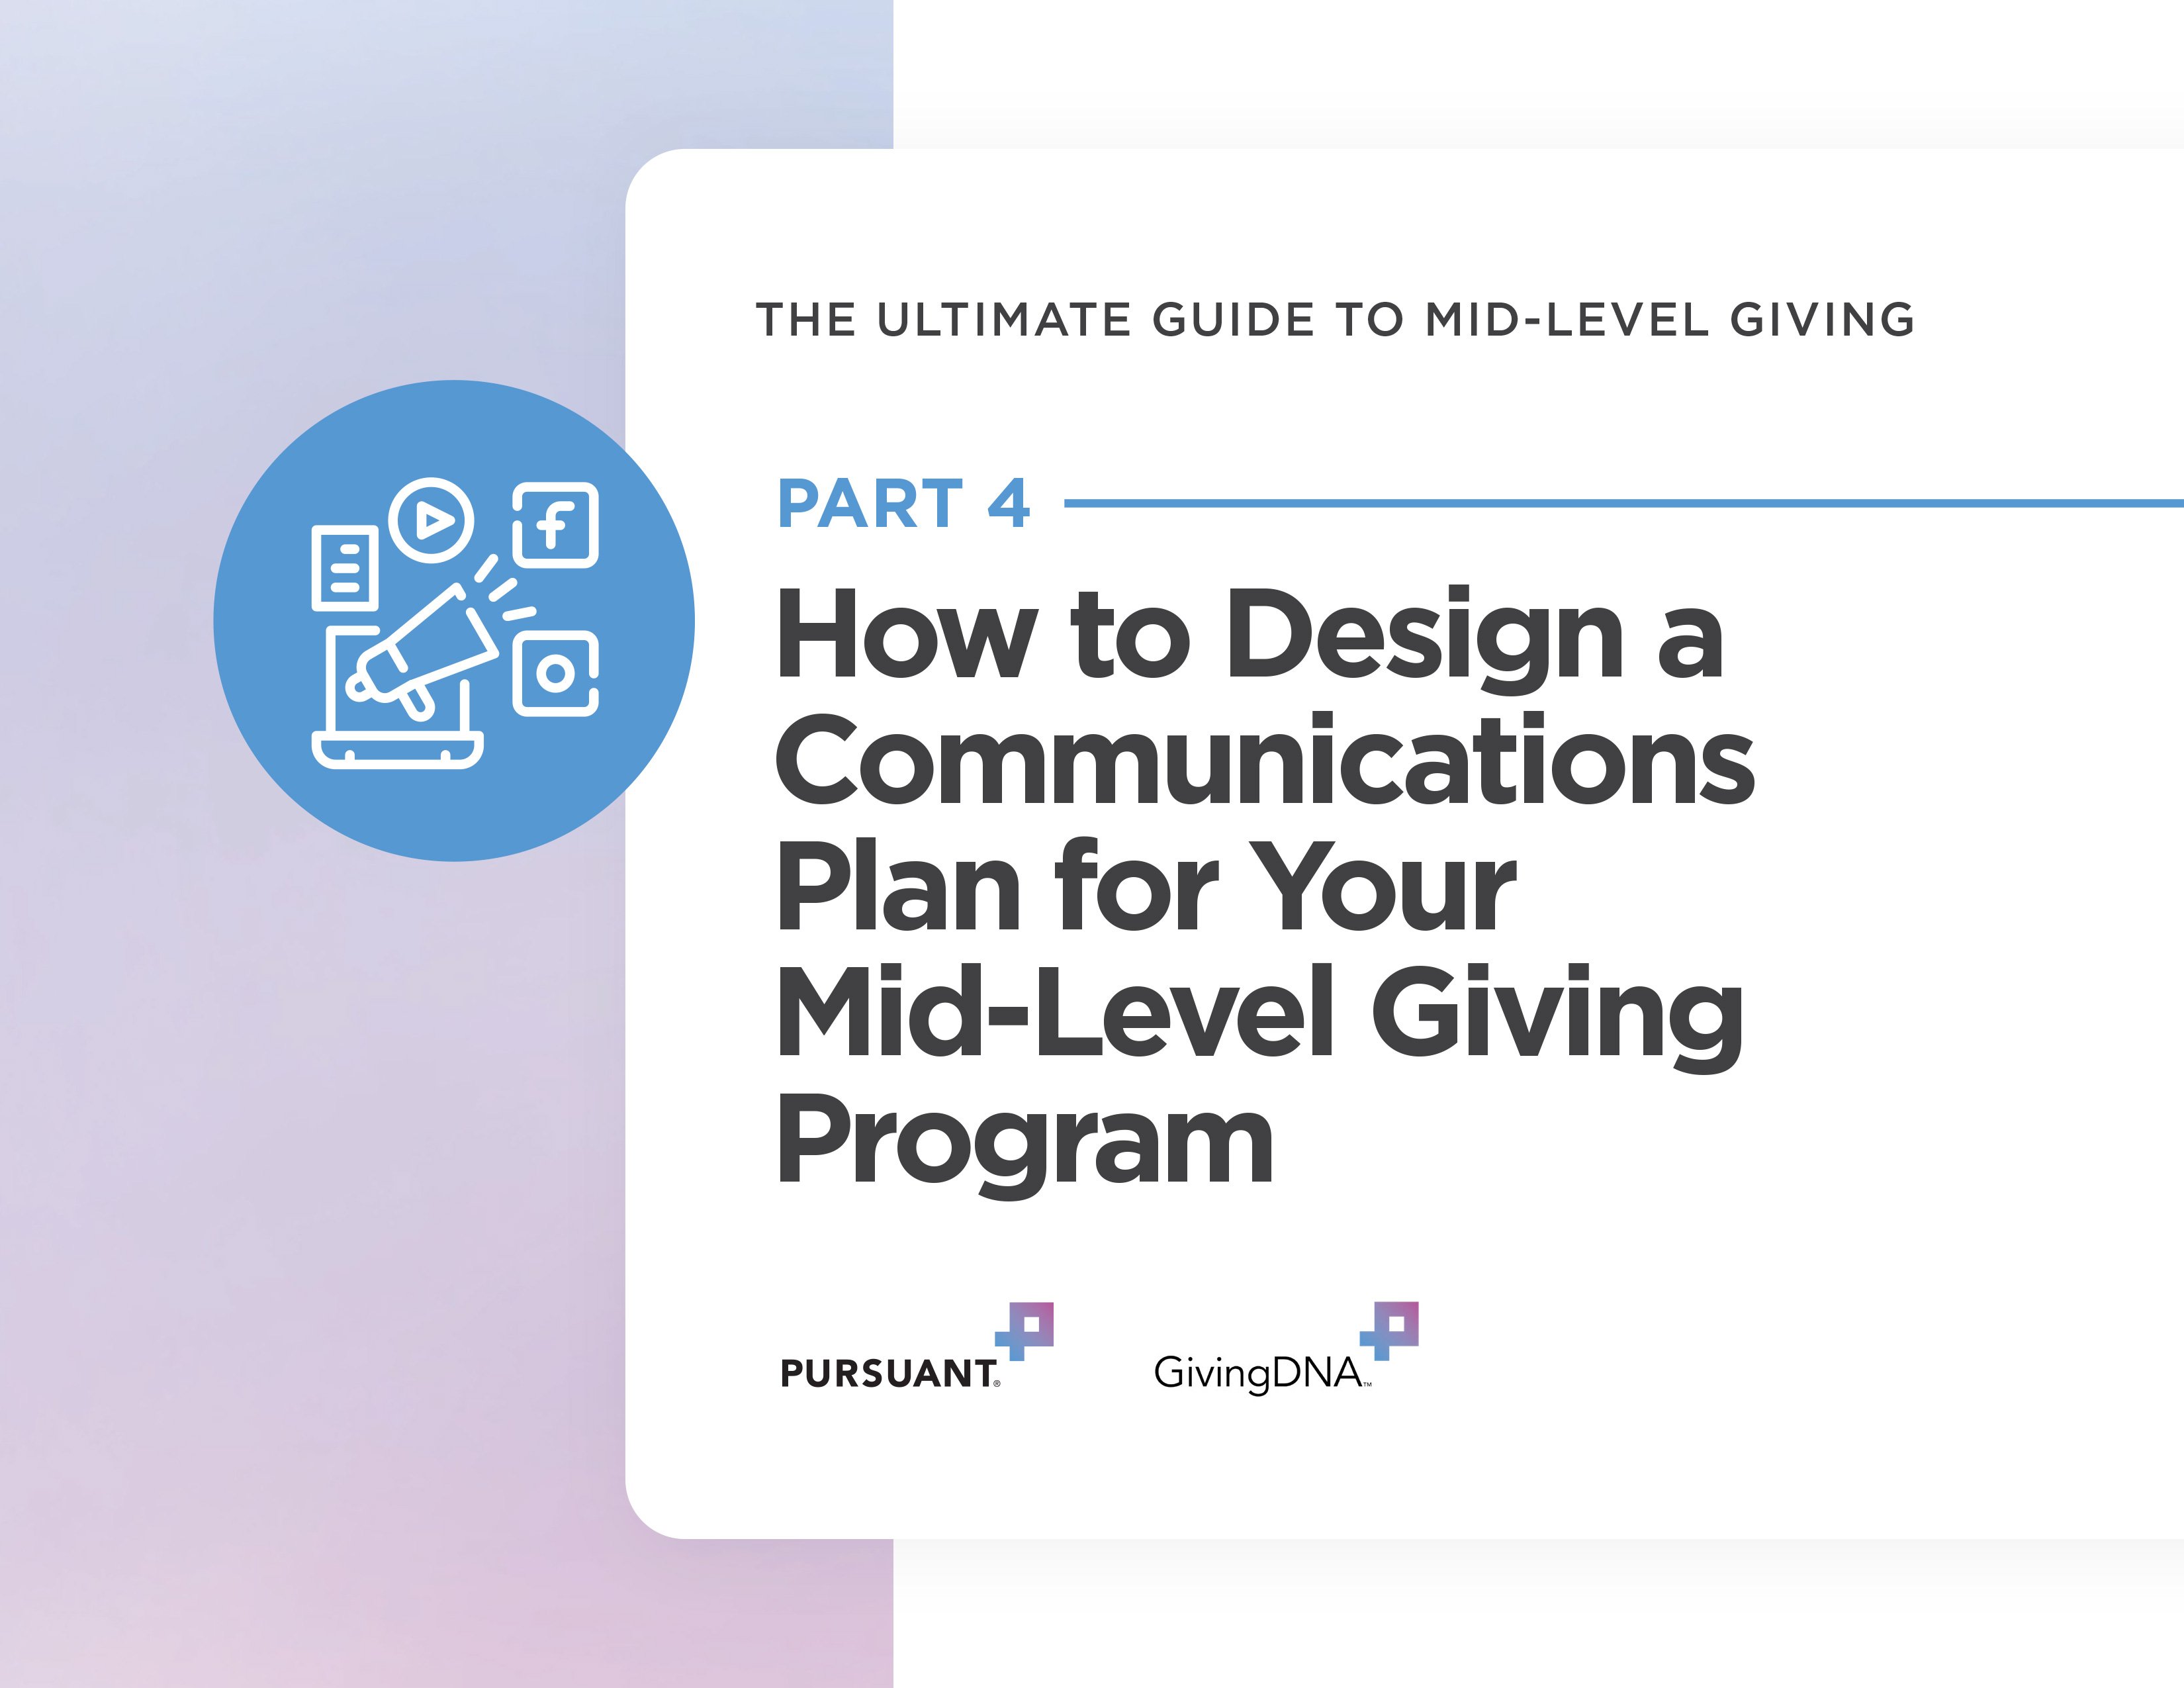 The Ultimate Guide to Mid-Level Giving Part 4: How to Design a Communications Plan for Your Mid-Level Giving Program